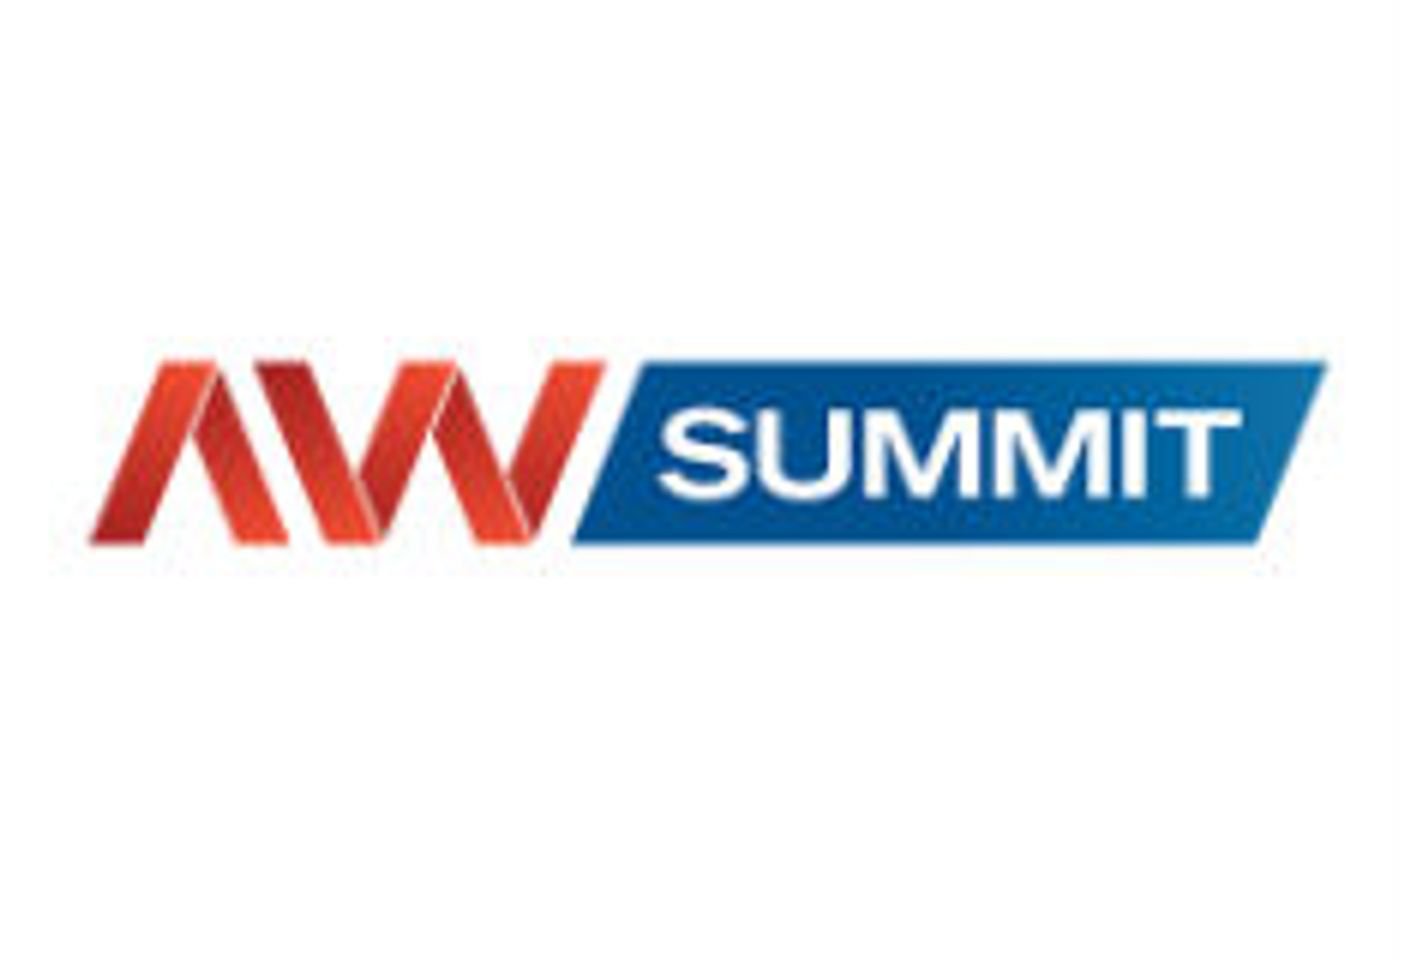 Adult Webcam Summit Counts 300 Participants and Growing